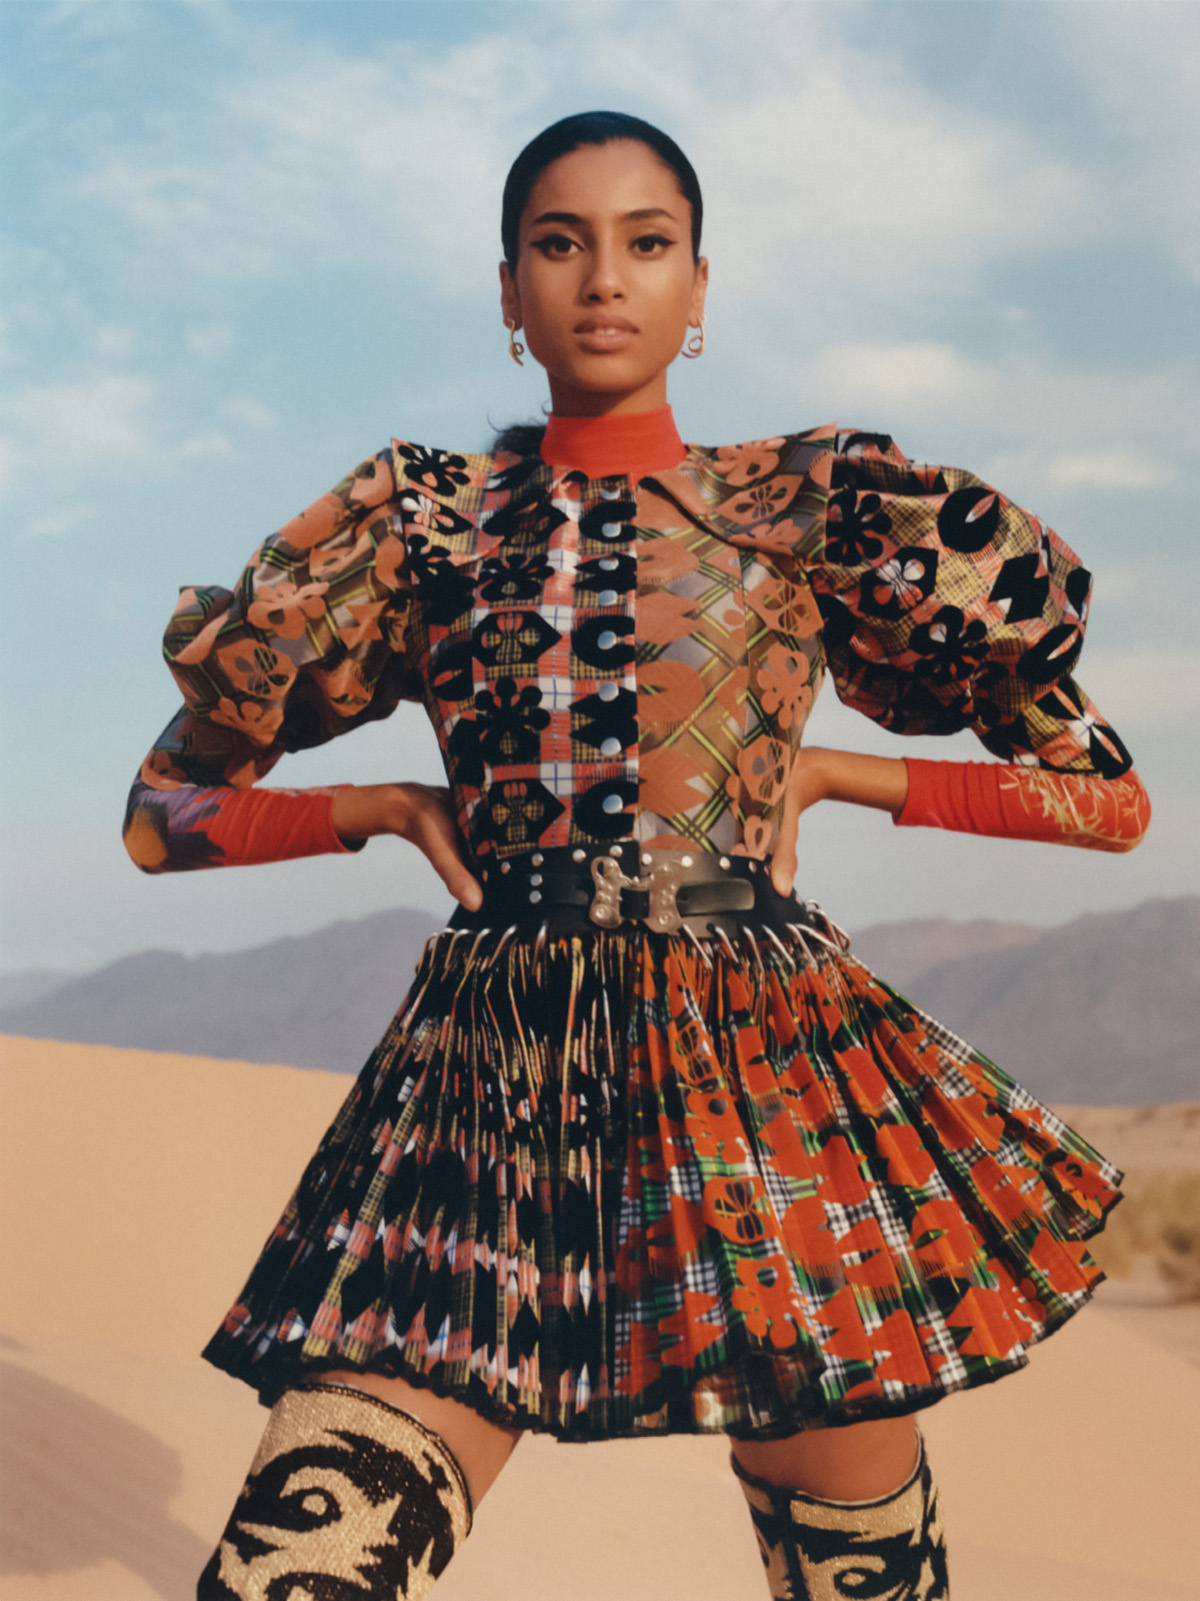 Imaan Hammam and He Cong by Eddie Wrey for Vogue Global January 2022